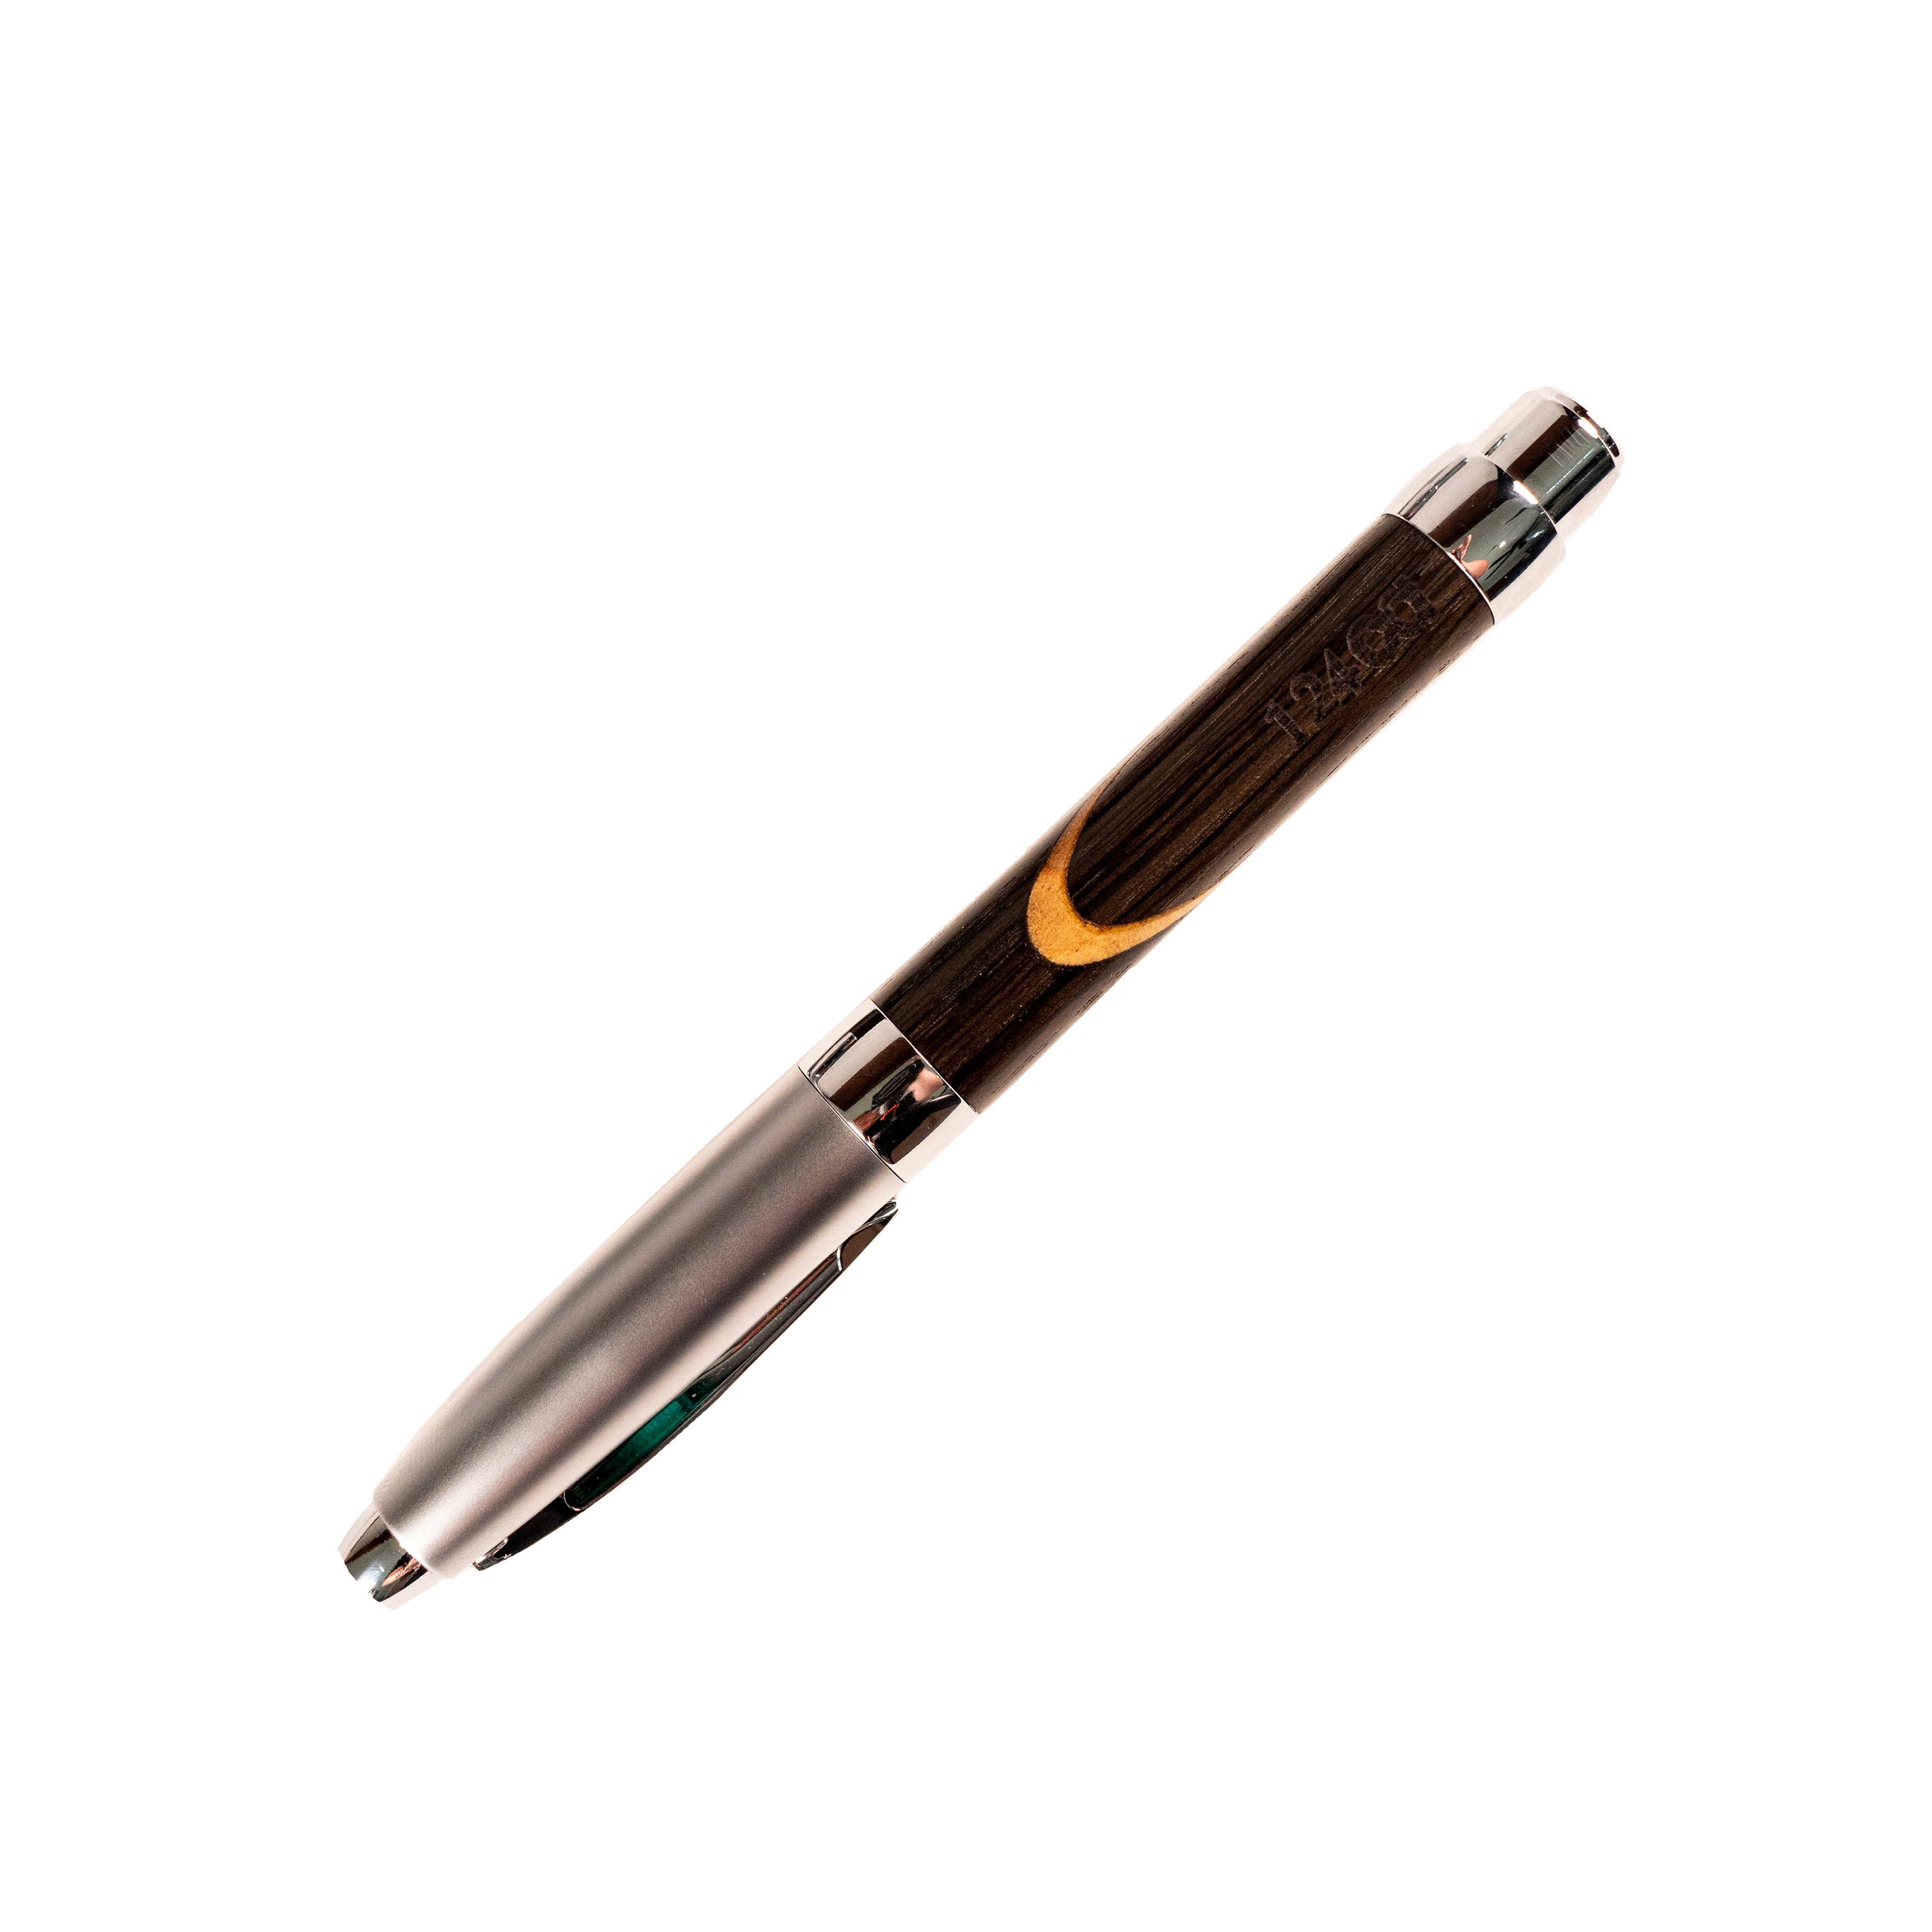 Arc Pen - World's First 2-Sided Magnetically Aligning Pen by